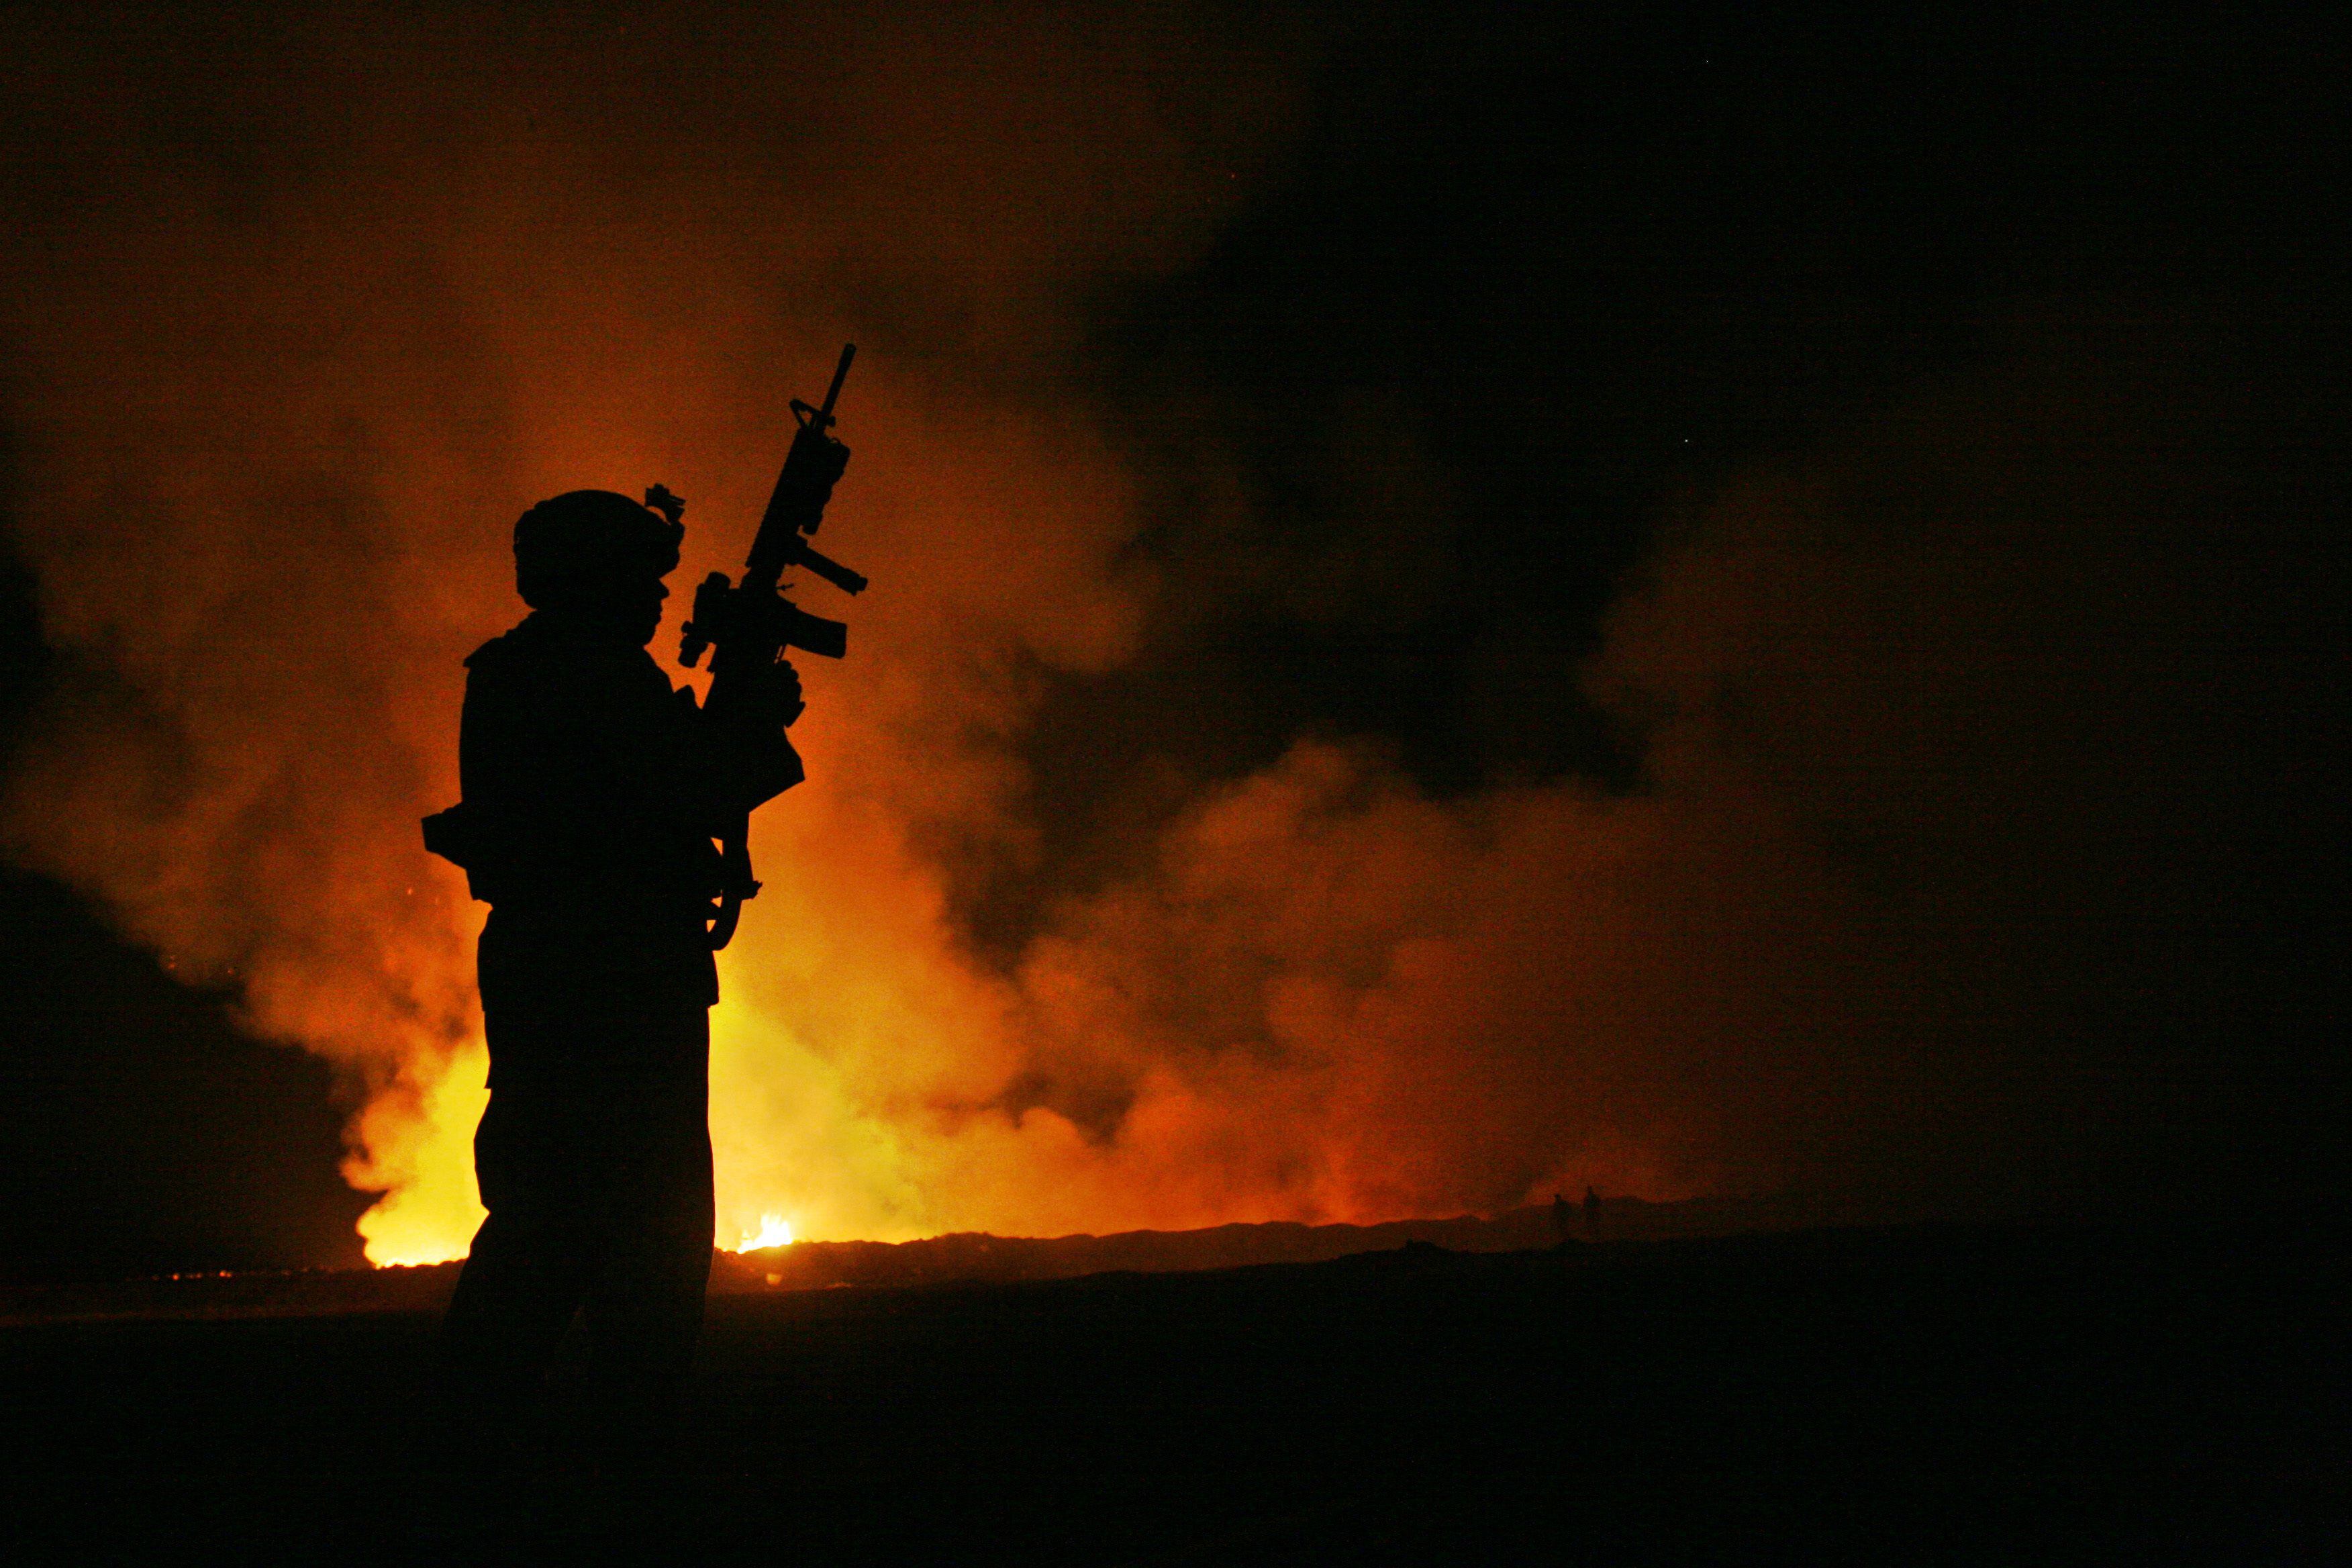 Sgt. Robert Brown watches over workers at a burn pit in Iraq on May 25, 2007. (Cpl. Samuel D. Corum/Marine Corps)